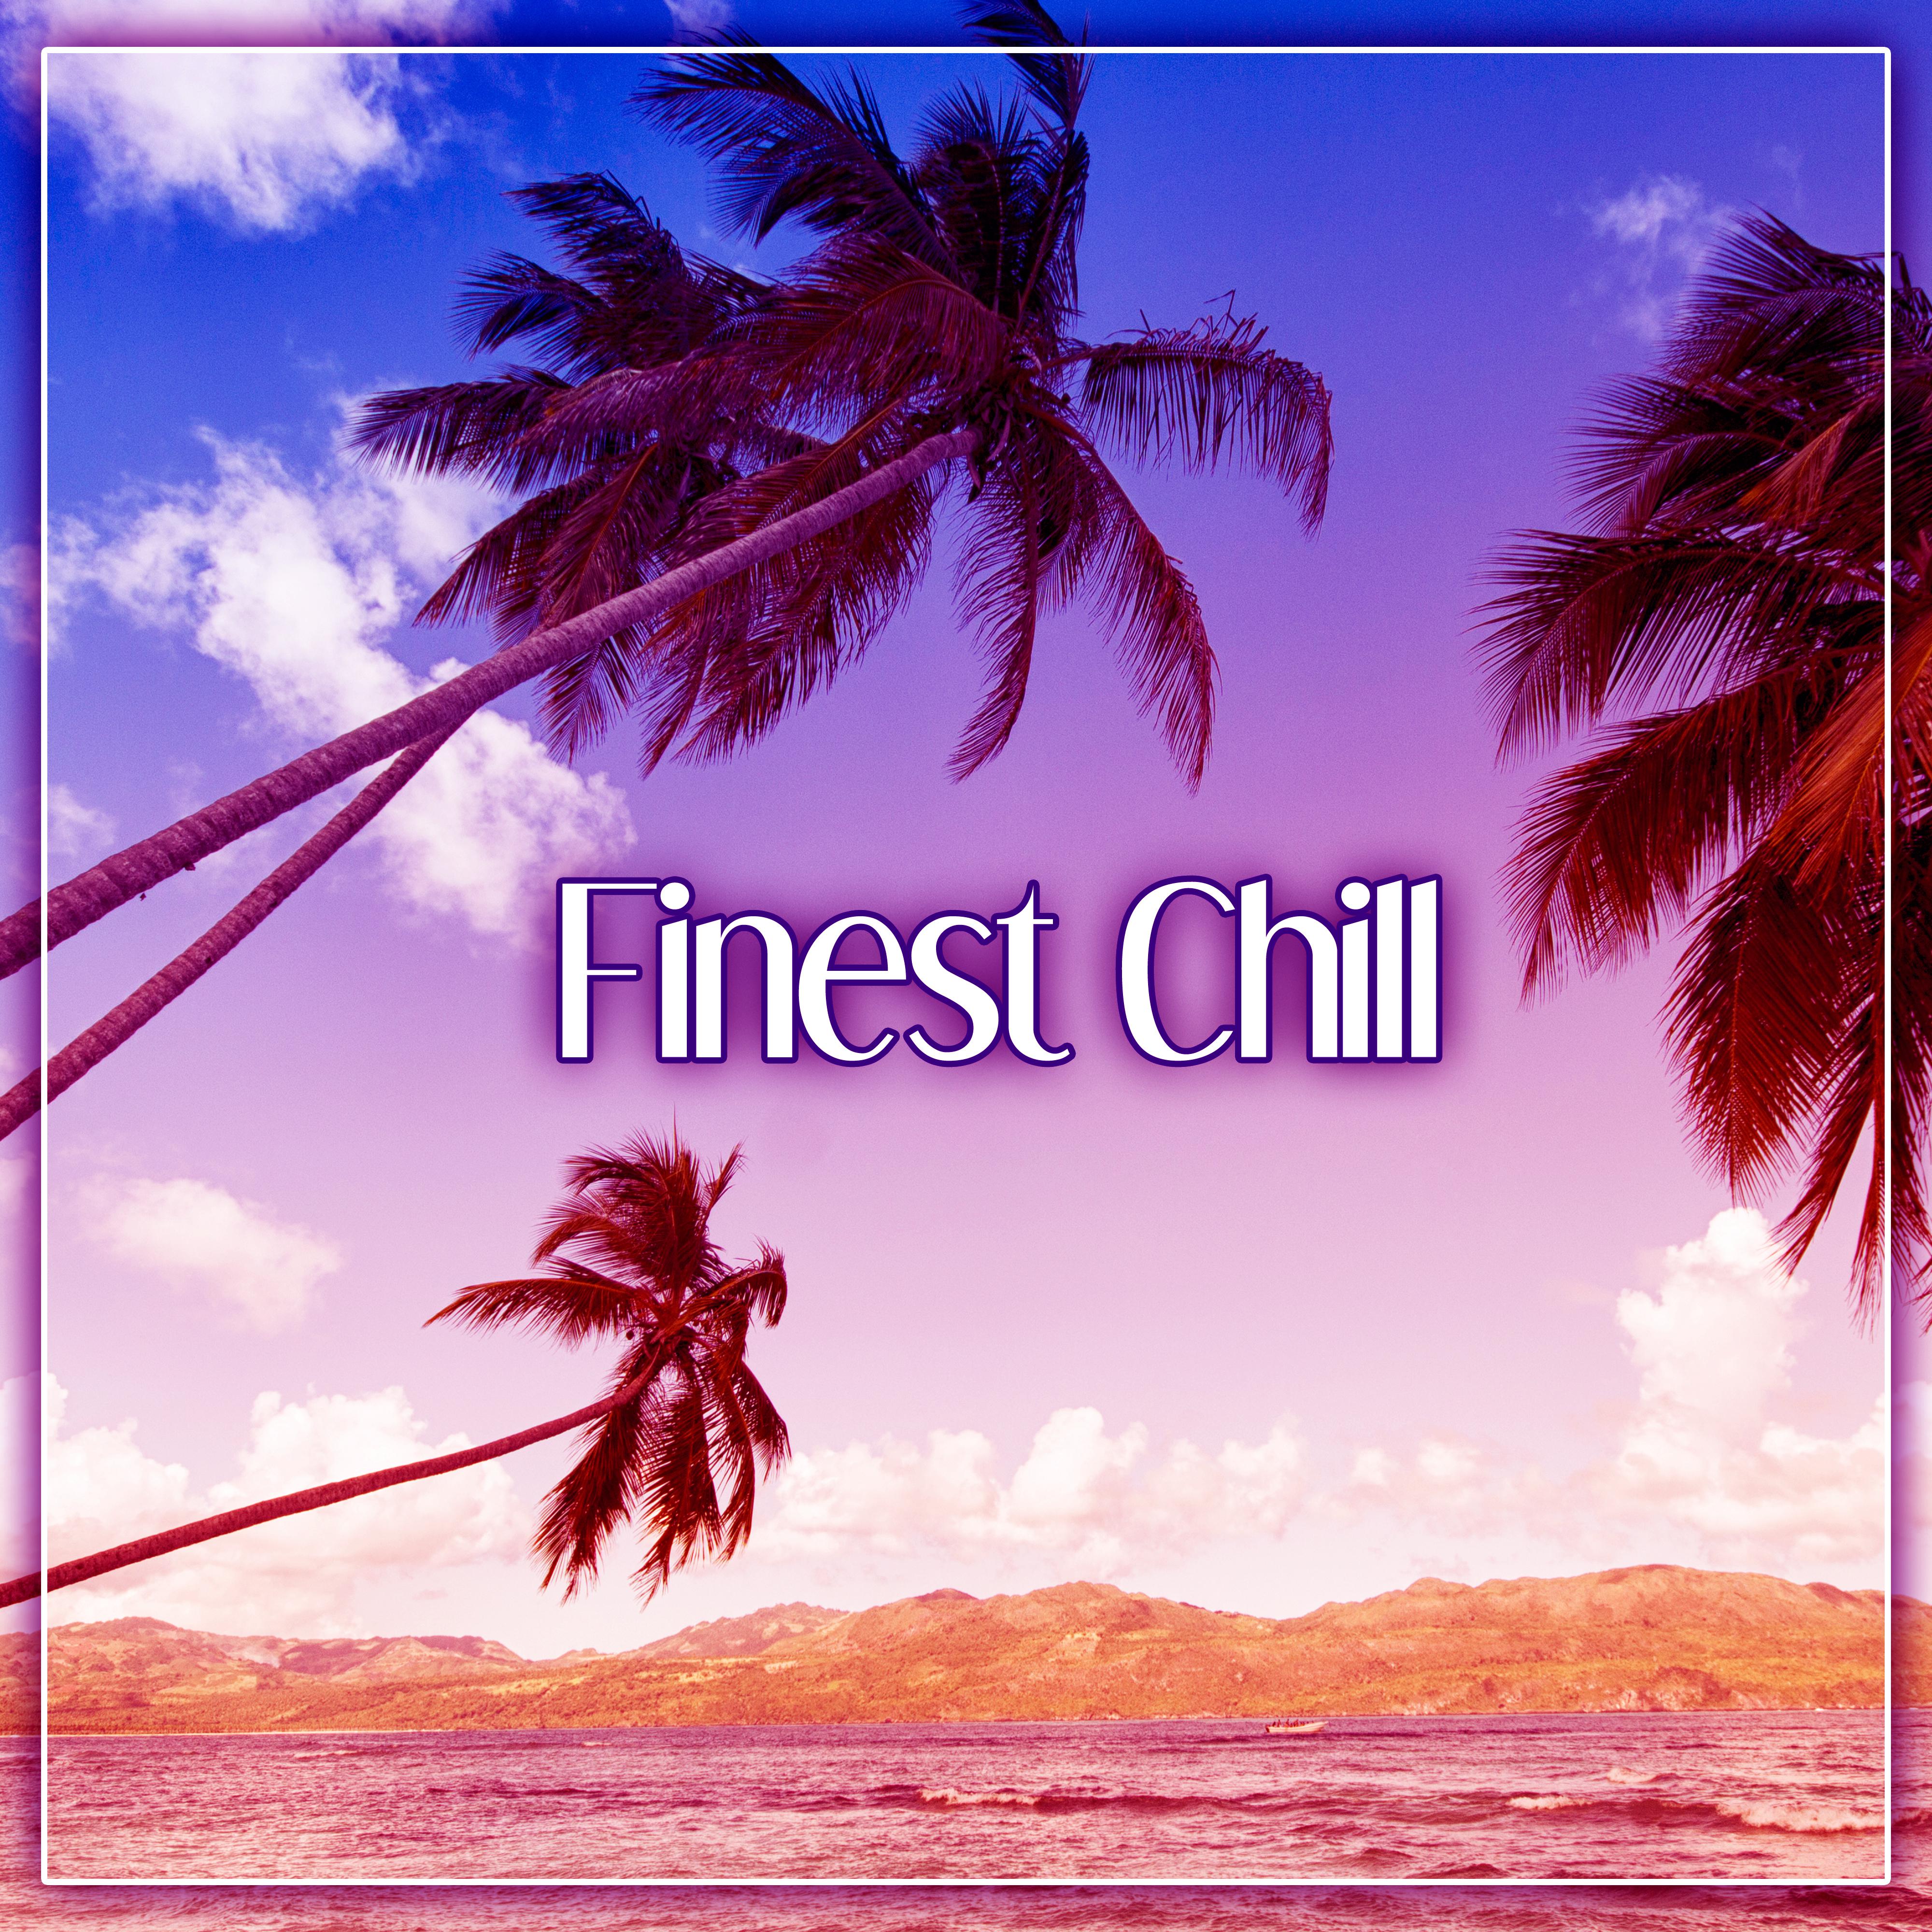 Finest Chill - Beach Music, Summer Relax, Peaceful Music, Relaxation, Chillout Vibes, Relax Yourself